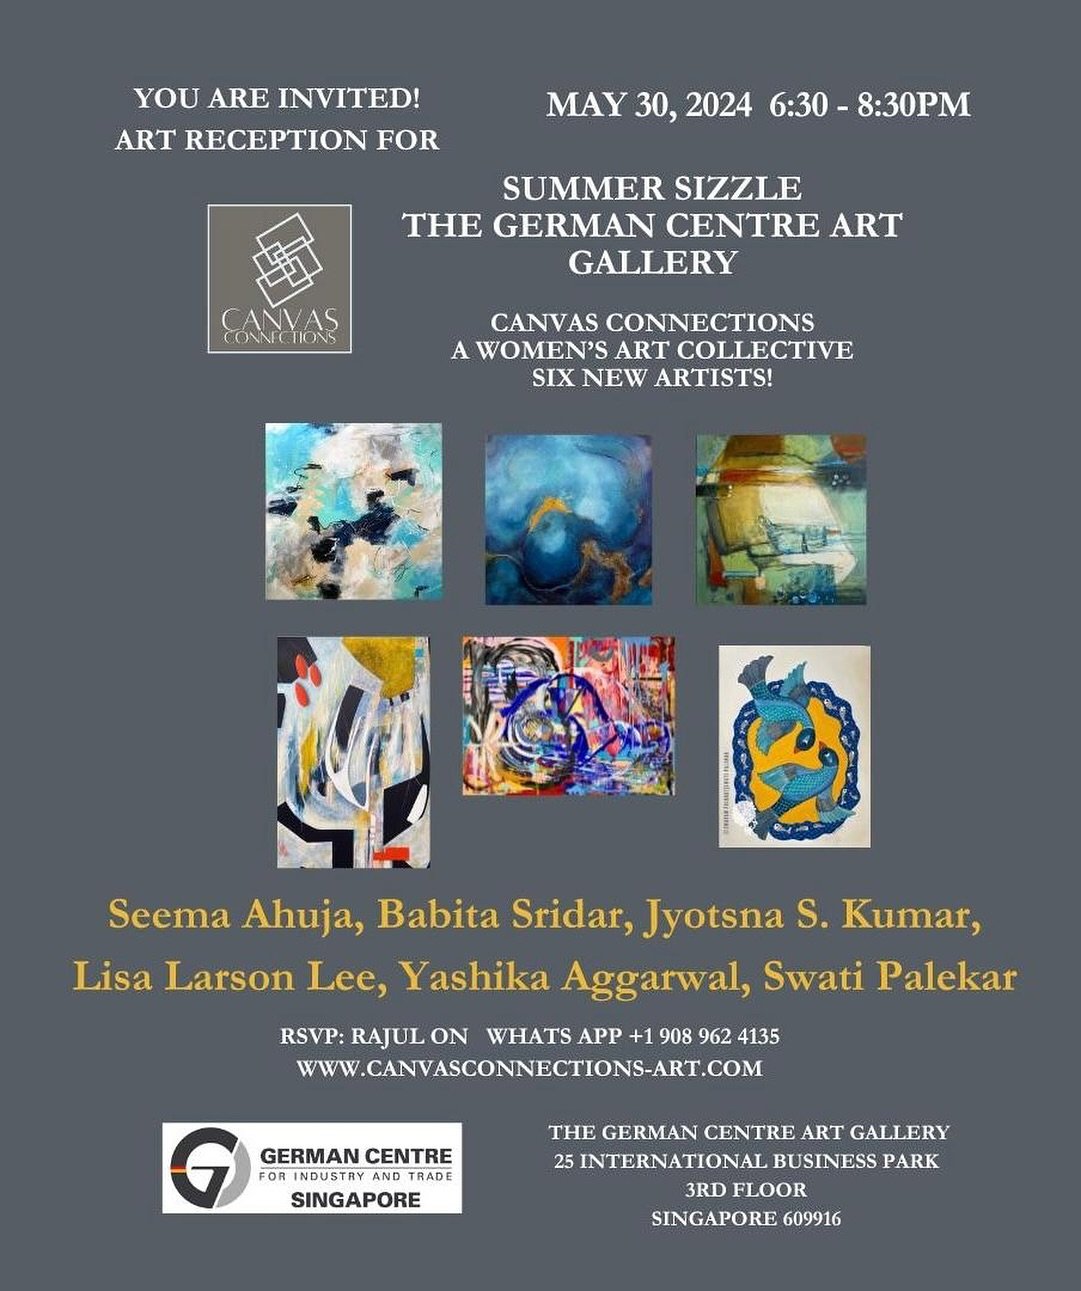 SAVE THE DATE ‼️ 

Come join us for the opening reception of Summer Sizzle .
🗓️ 30th May 2024
⏰ 6.30-8.30pm 
📍The German Centre Art Gallery, 25 International Business Park, 609916, Singapore

Artist lineup: 
@seemamixedmedia 
@babscreativeart 
@jo.